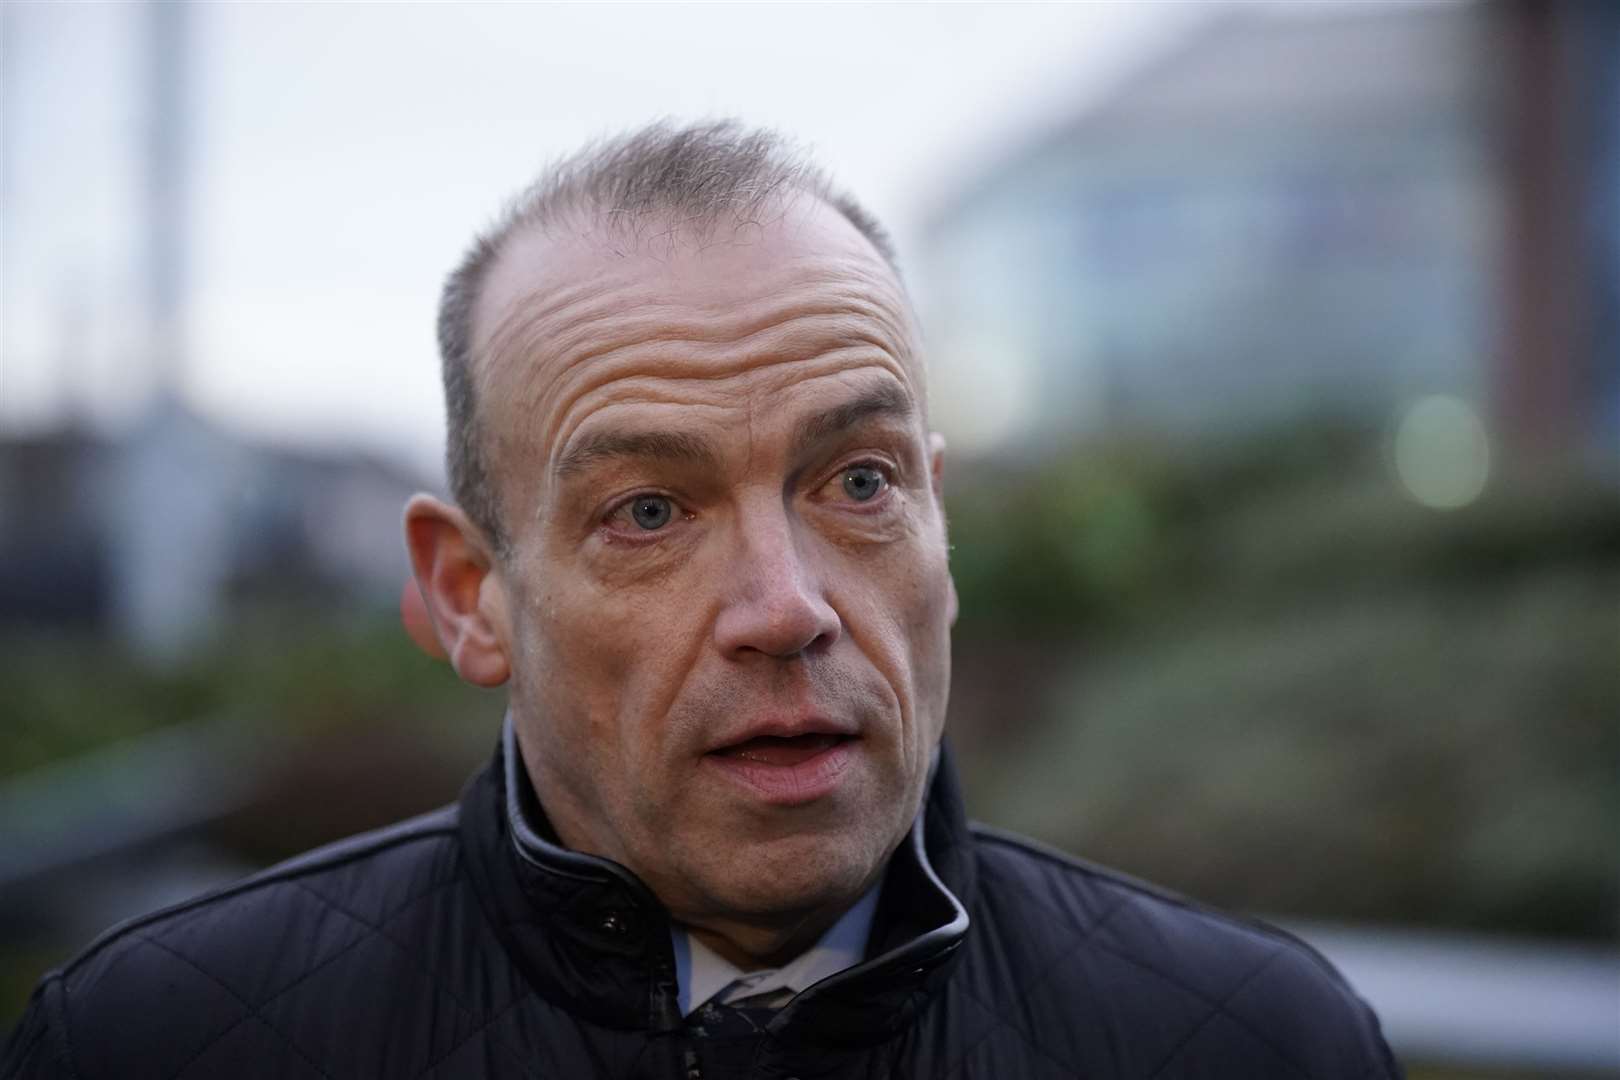 Northern Ireland Secretary Chris Heaton-Harris insists the payments would already have been made if a Stormont executive was in place (Niall Carson/PA)